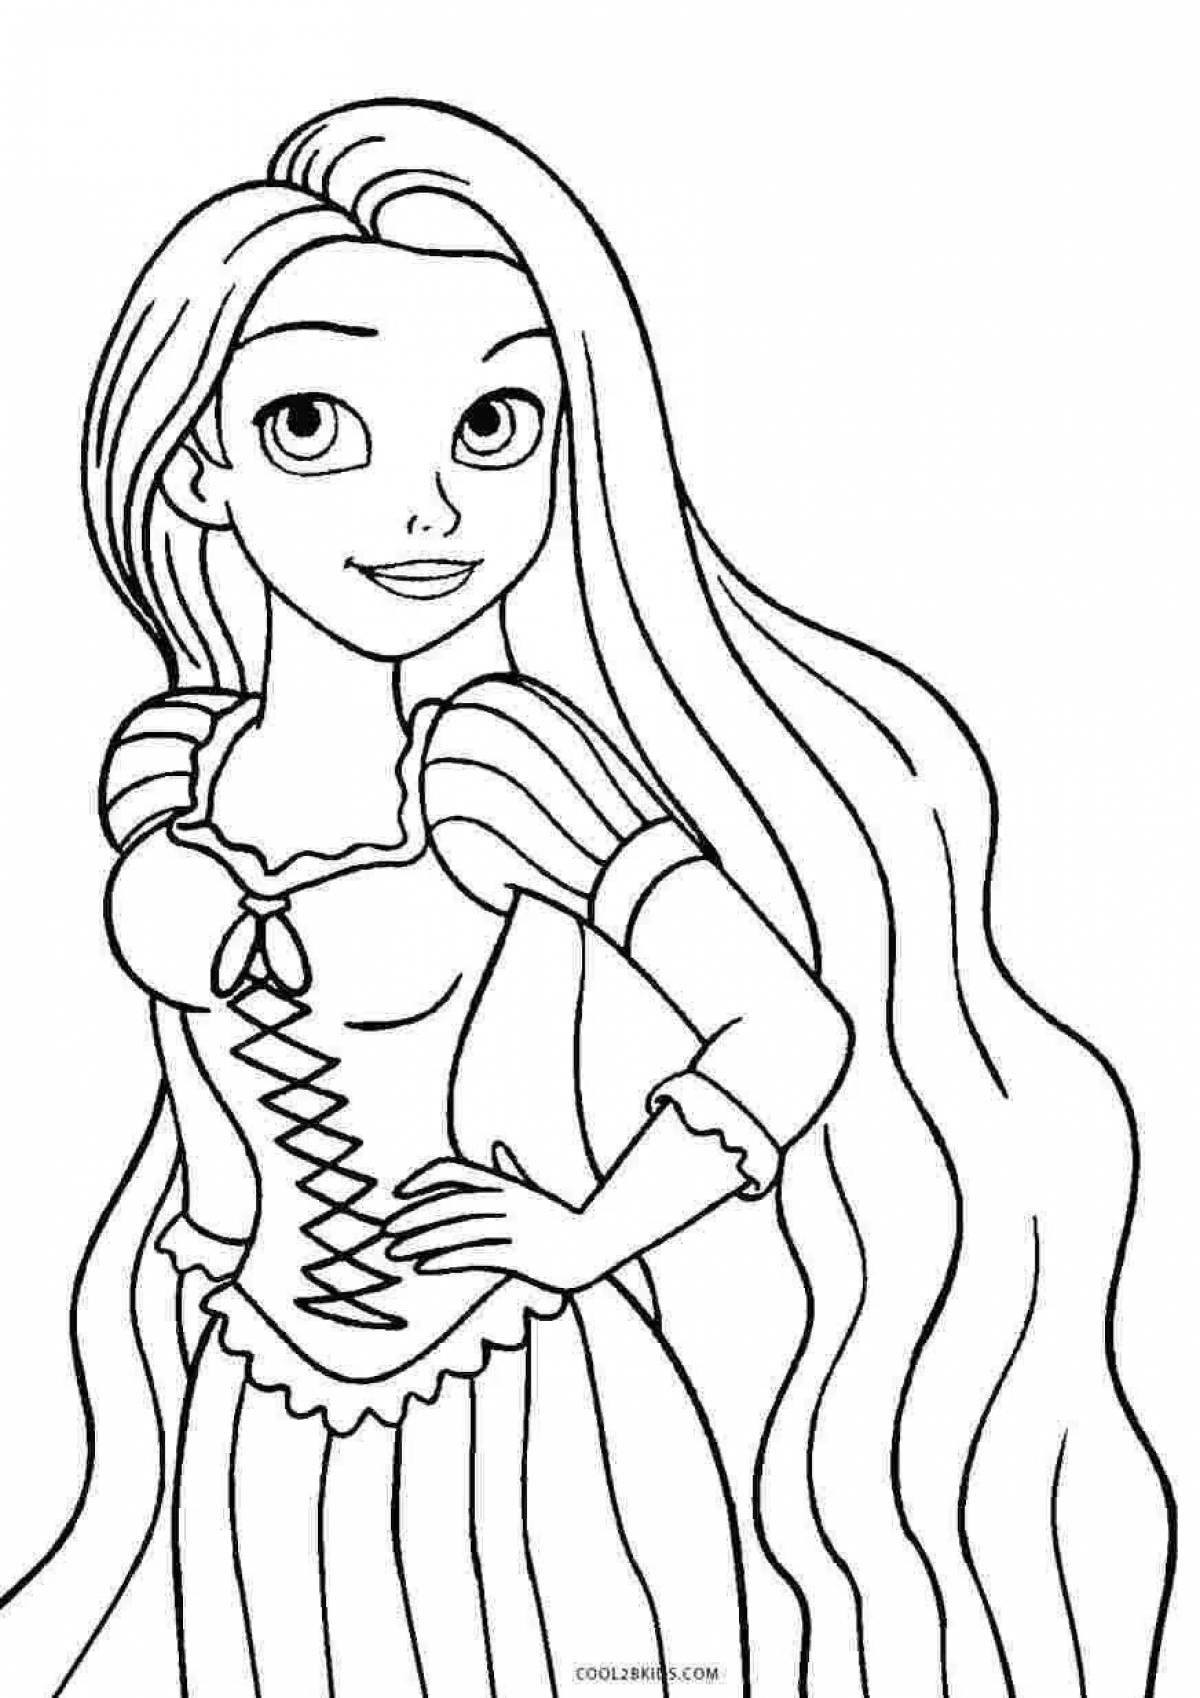 Miss tee's amazing coloring book